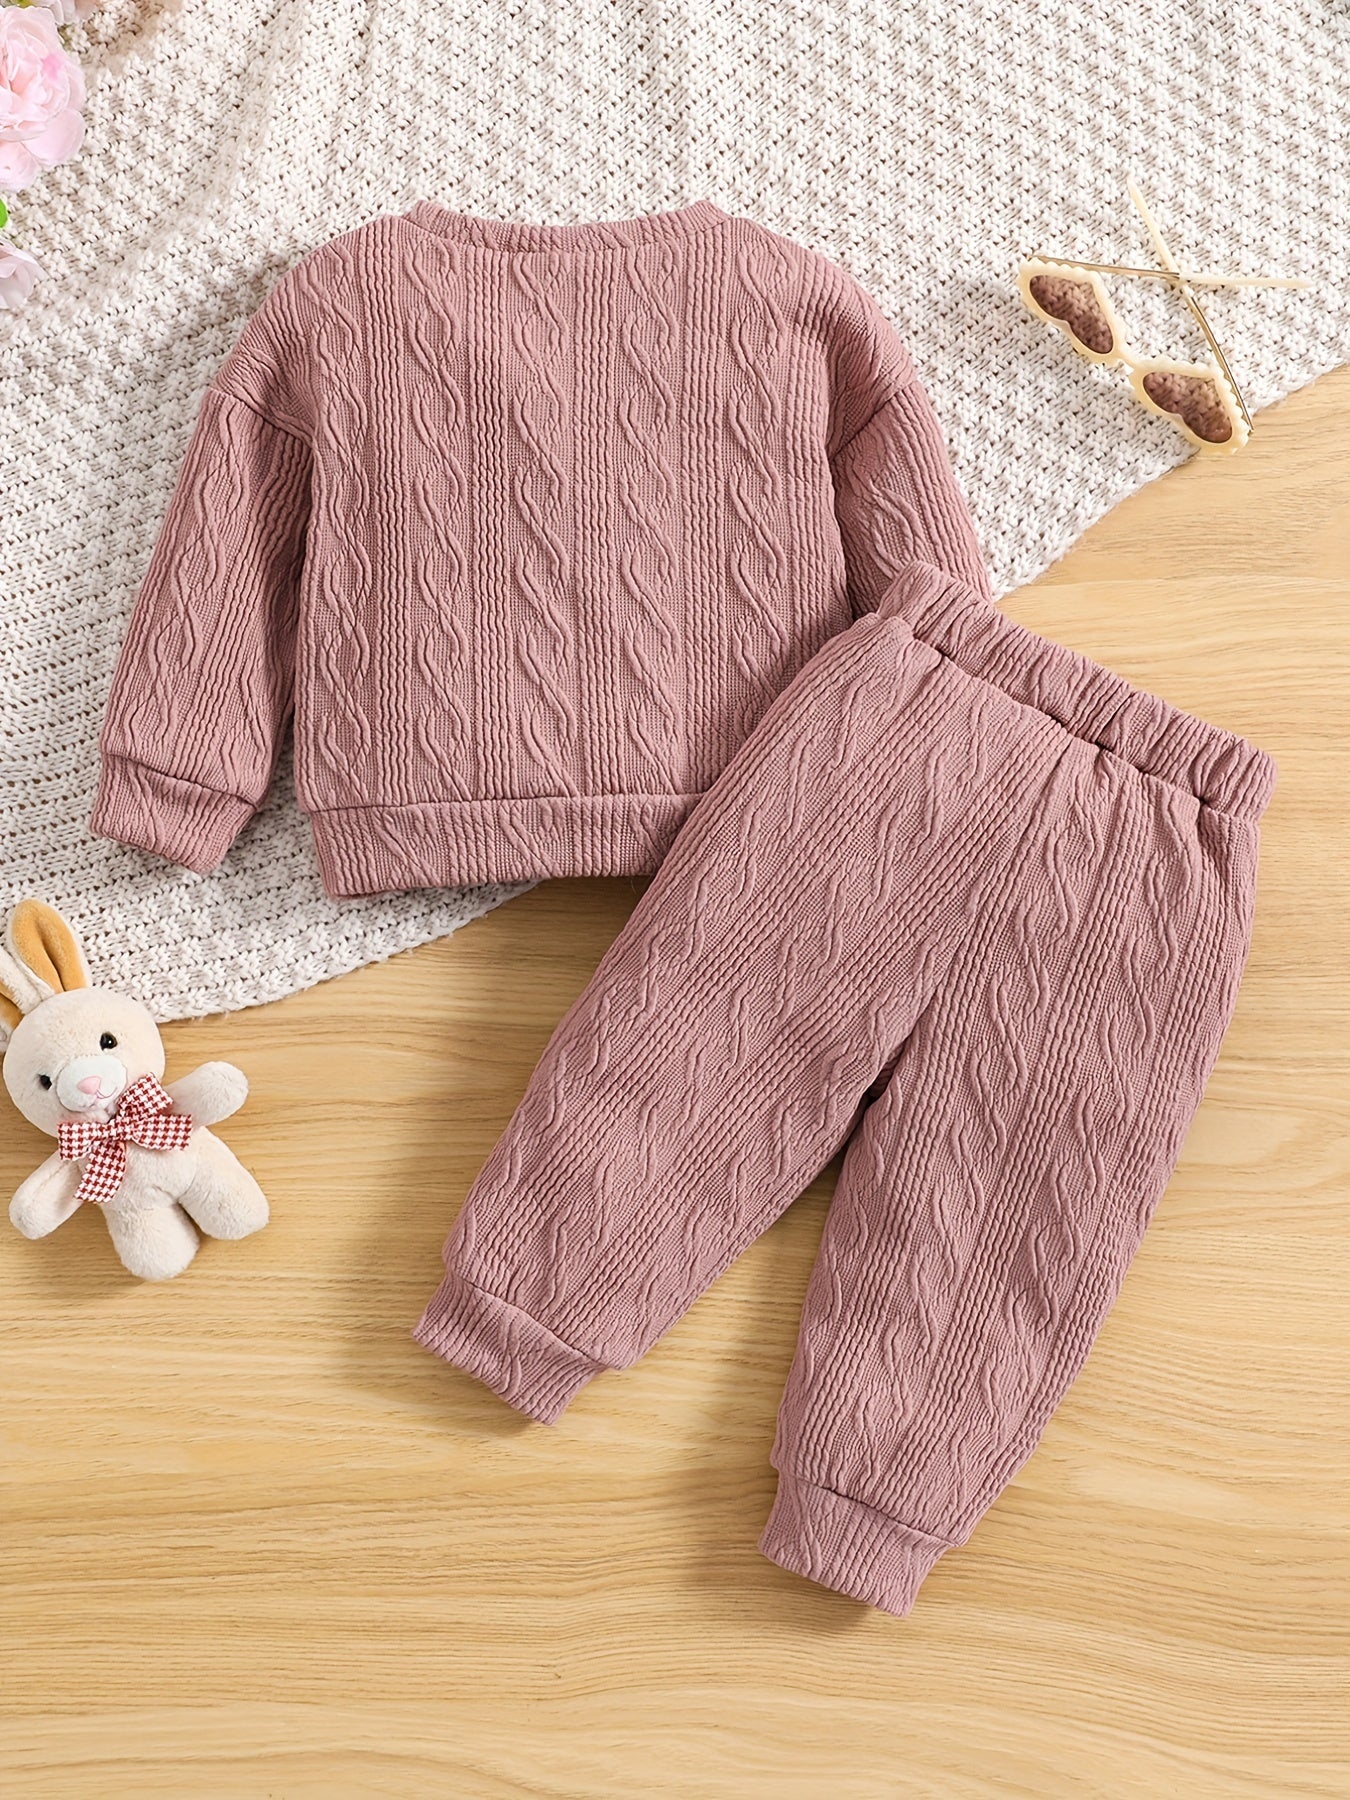 Adorable Toddler Baby Girls Bunny Print Sweatshirt Top & Coordinated Trousers Set - Comfy Casual Outfit for Playful Daily Wear - Ammpoure Wellbeing